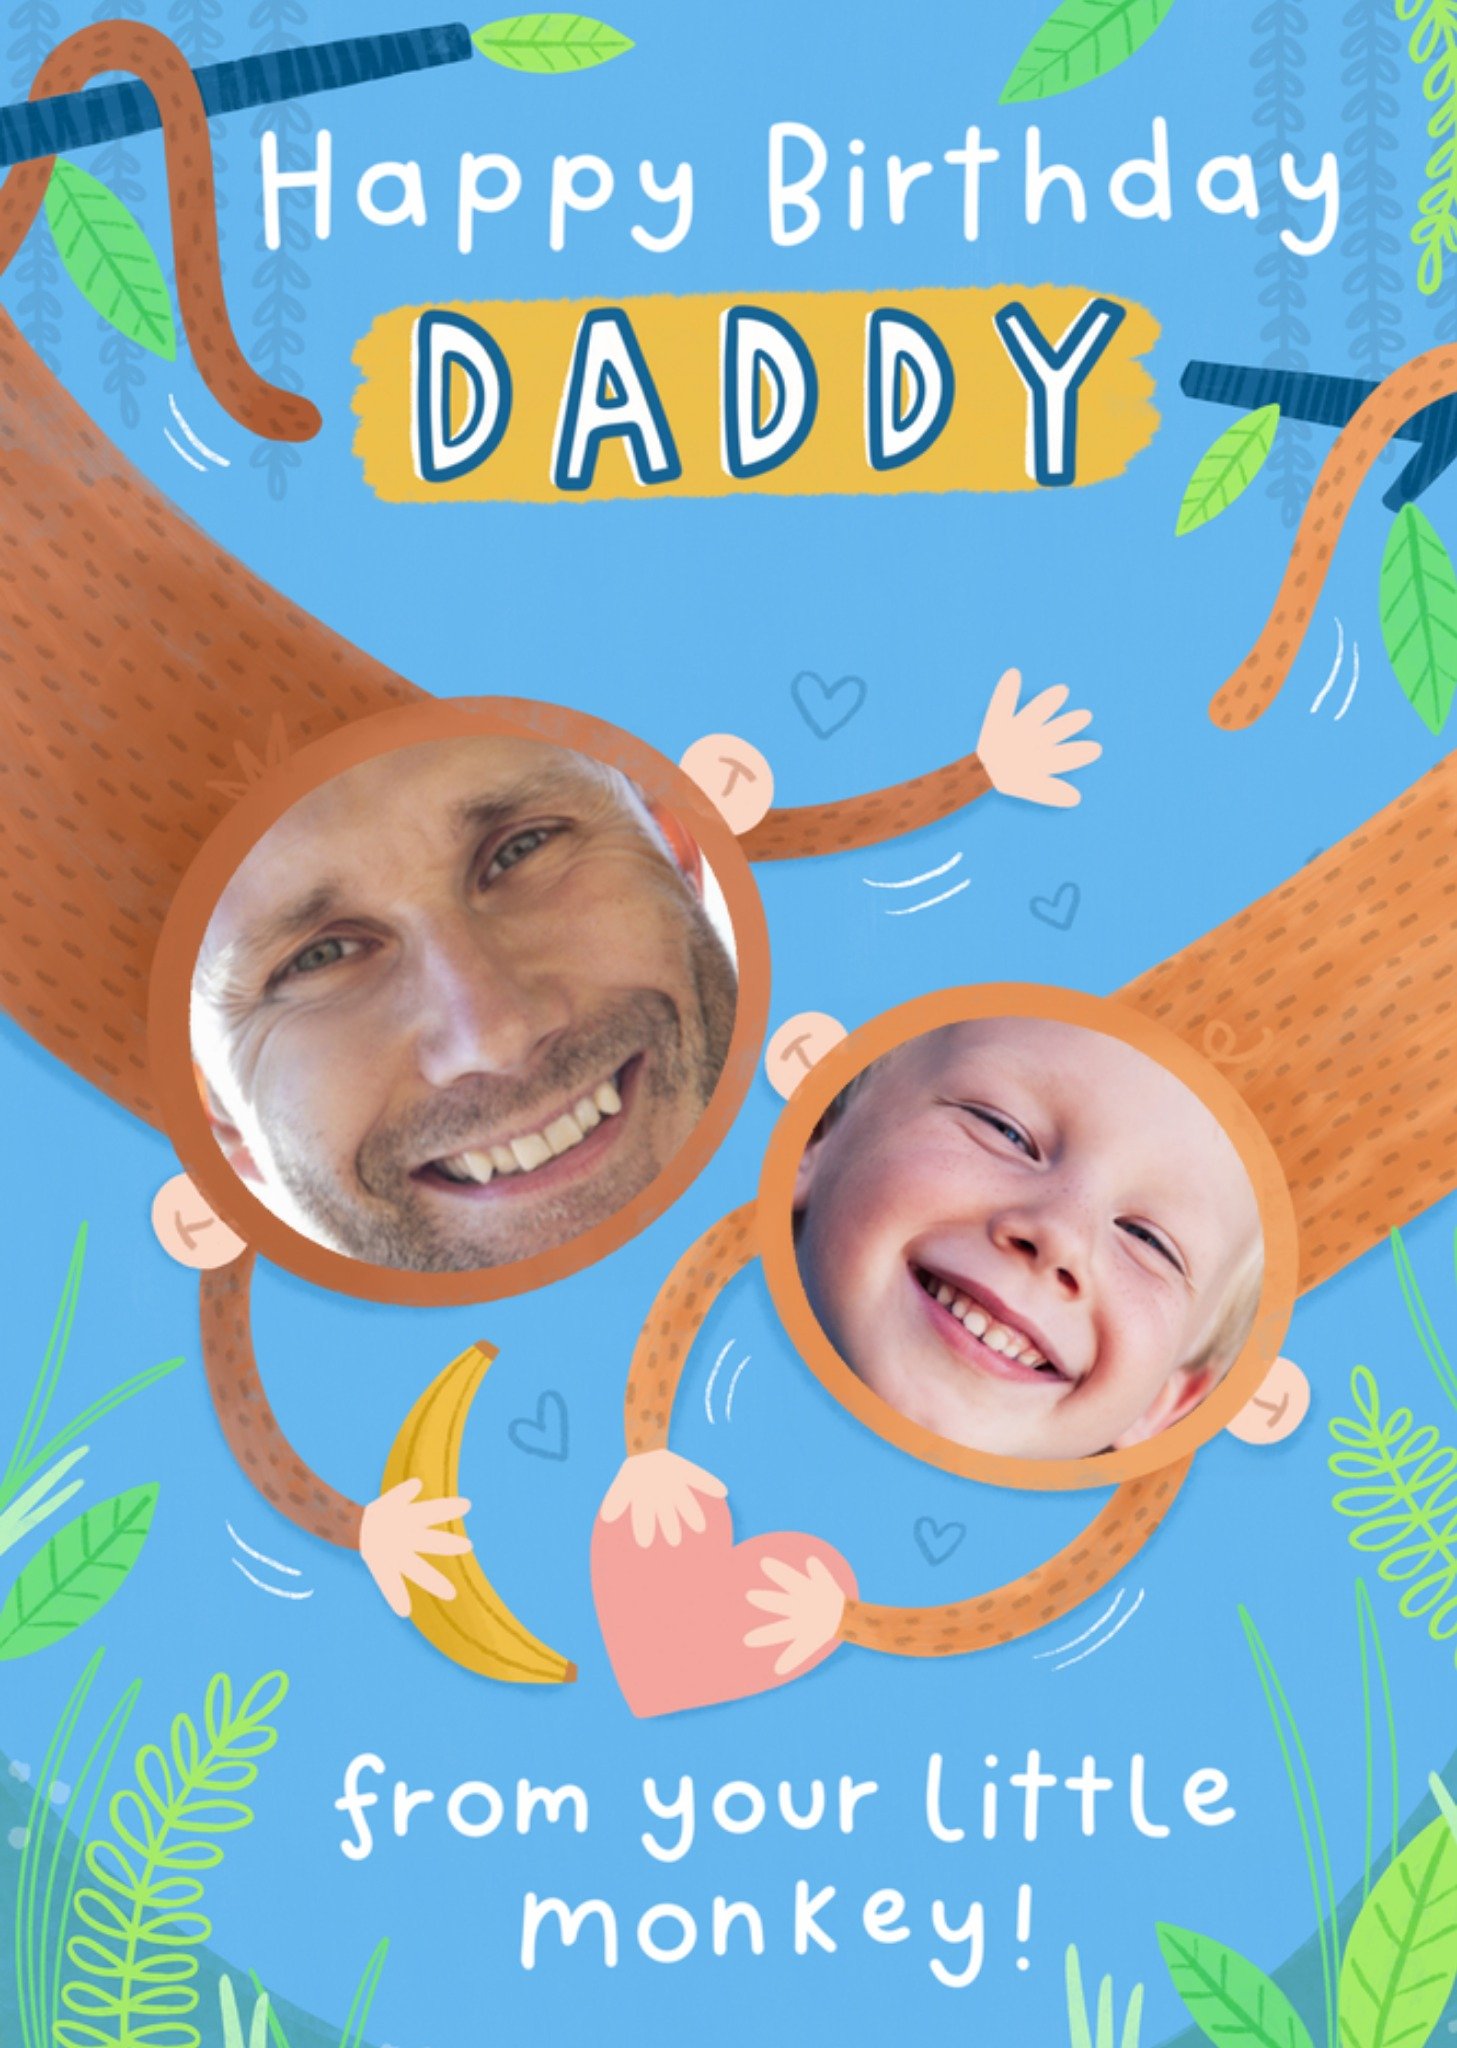 Moonpig Cheeky Monkeys Face In Hole Photo Upload Birthday Card For Daddy By Jess Moorhouse Ecard